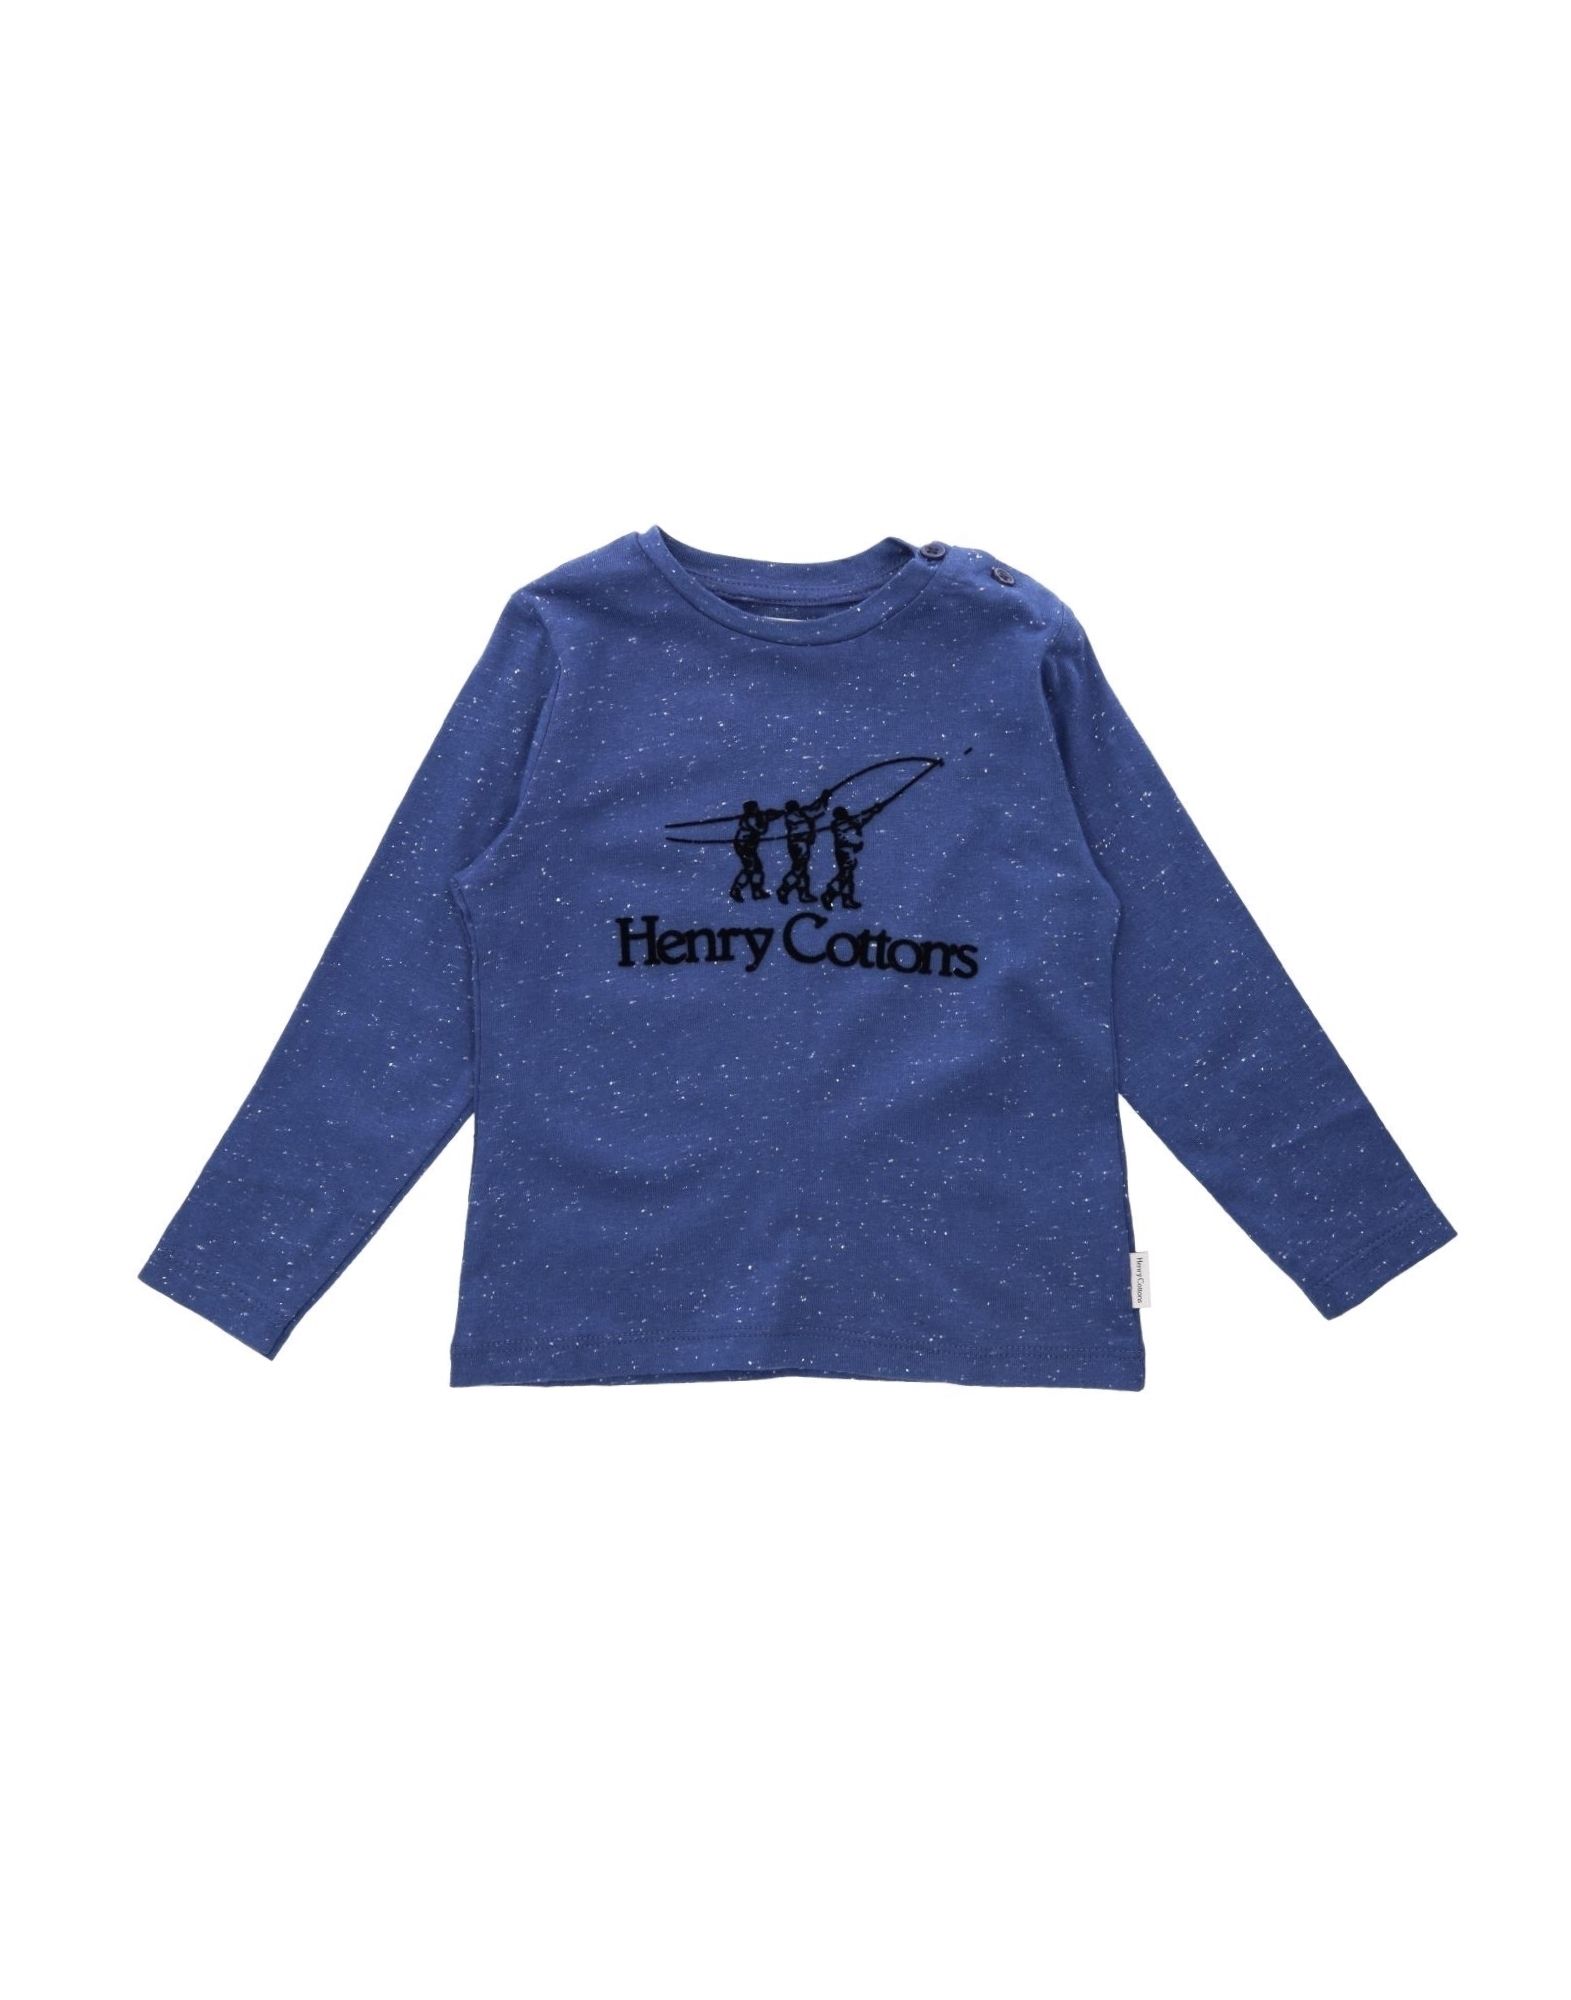 Henry Cotton's Kids' T-shirts In Slate Blue